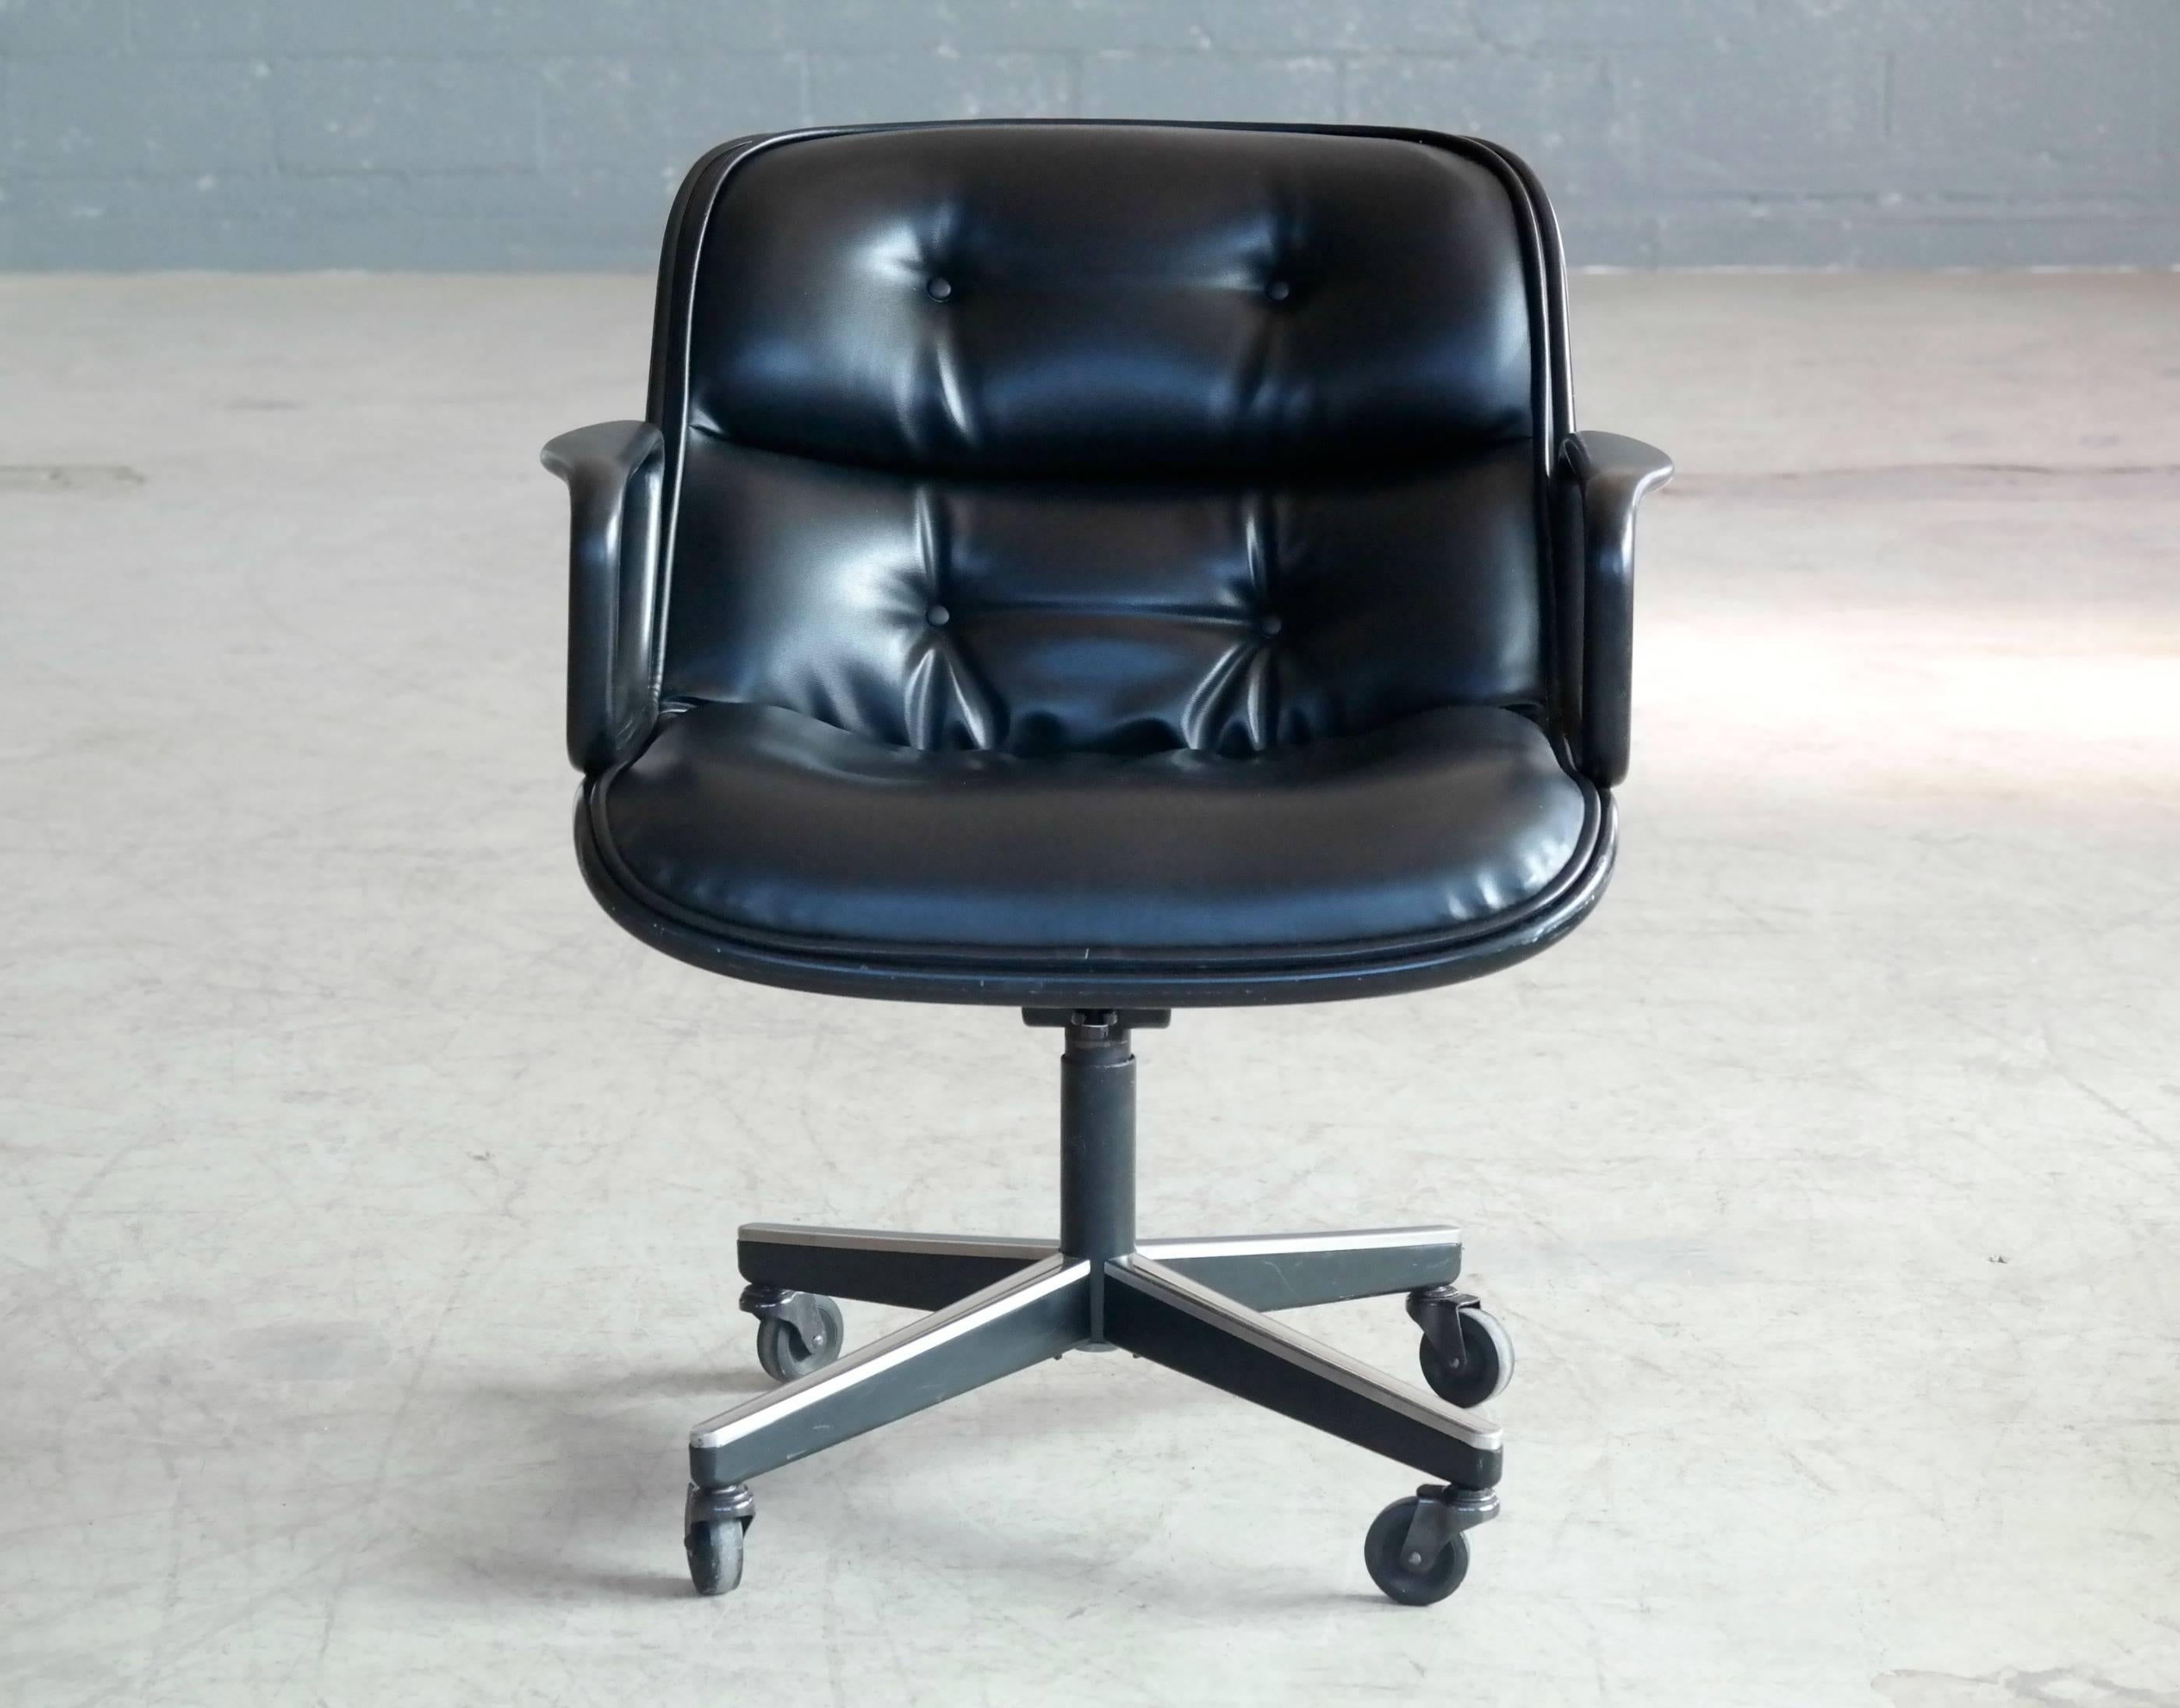 Charles Pollock’s timeless leather upholstered swivel executive chair designed in 1965. These chairs produced around 1975 still have the original Knoll labels attached. The Executive chair was designed using Pollock's ‘rim technology’, where all the